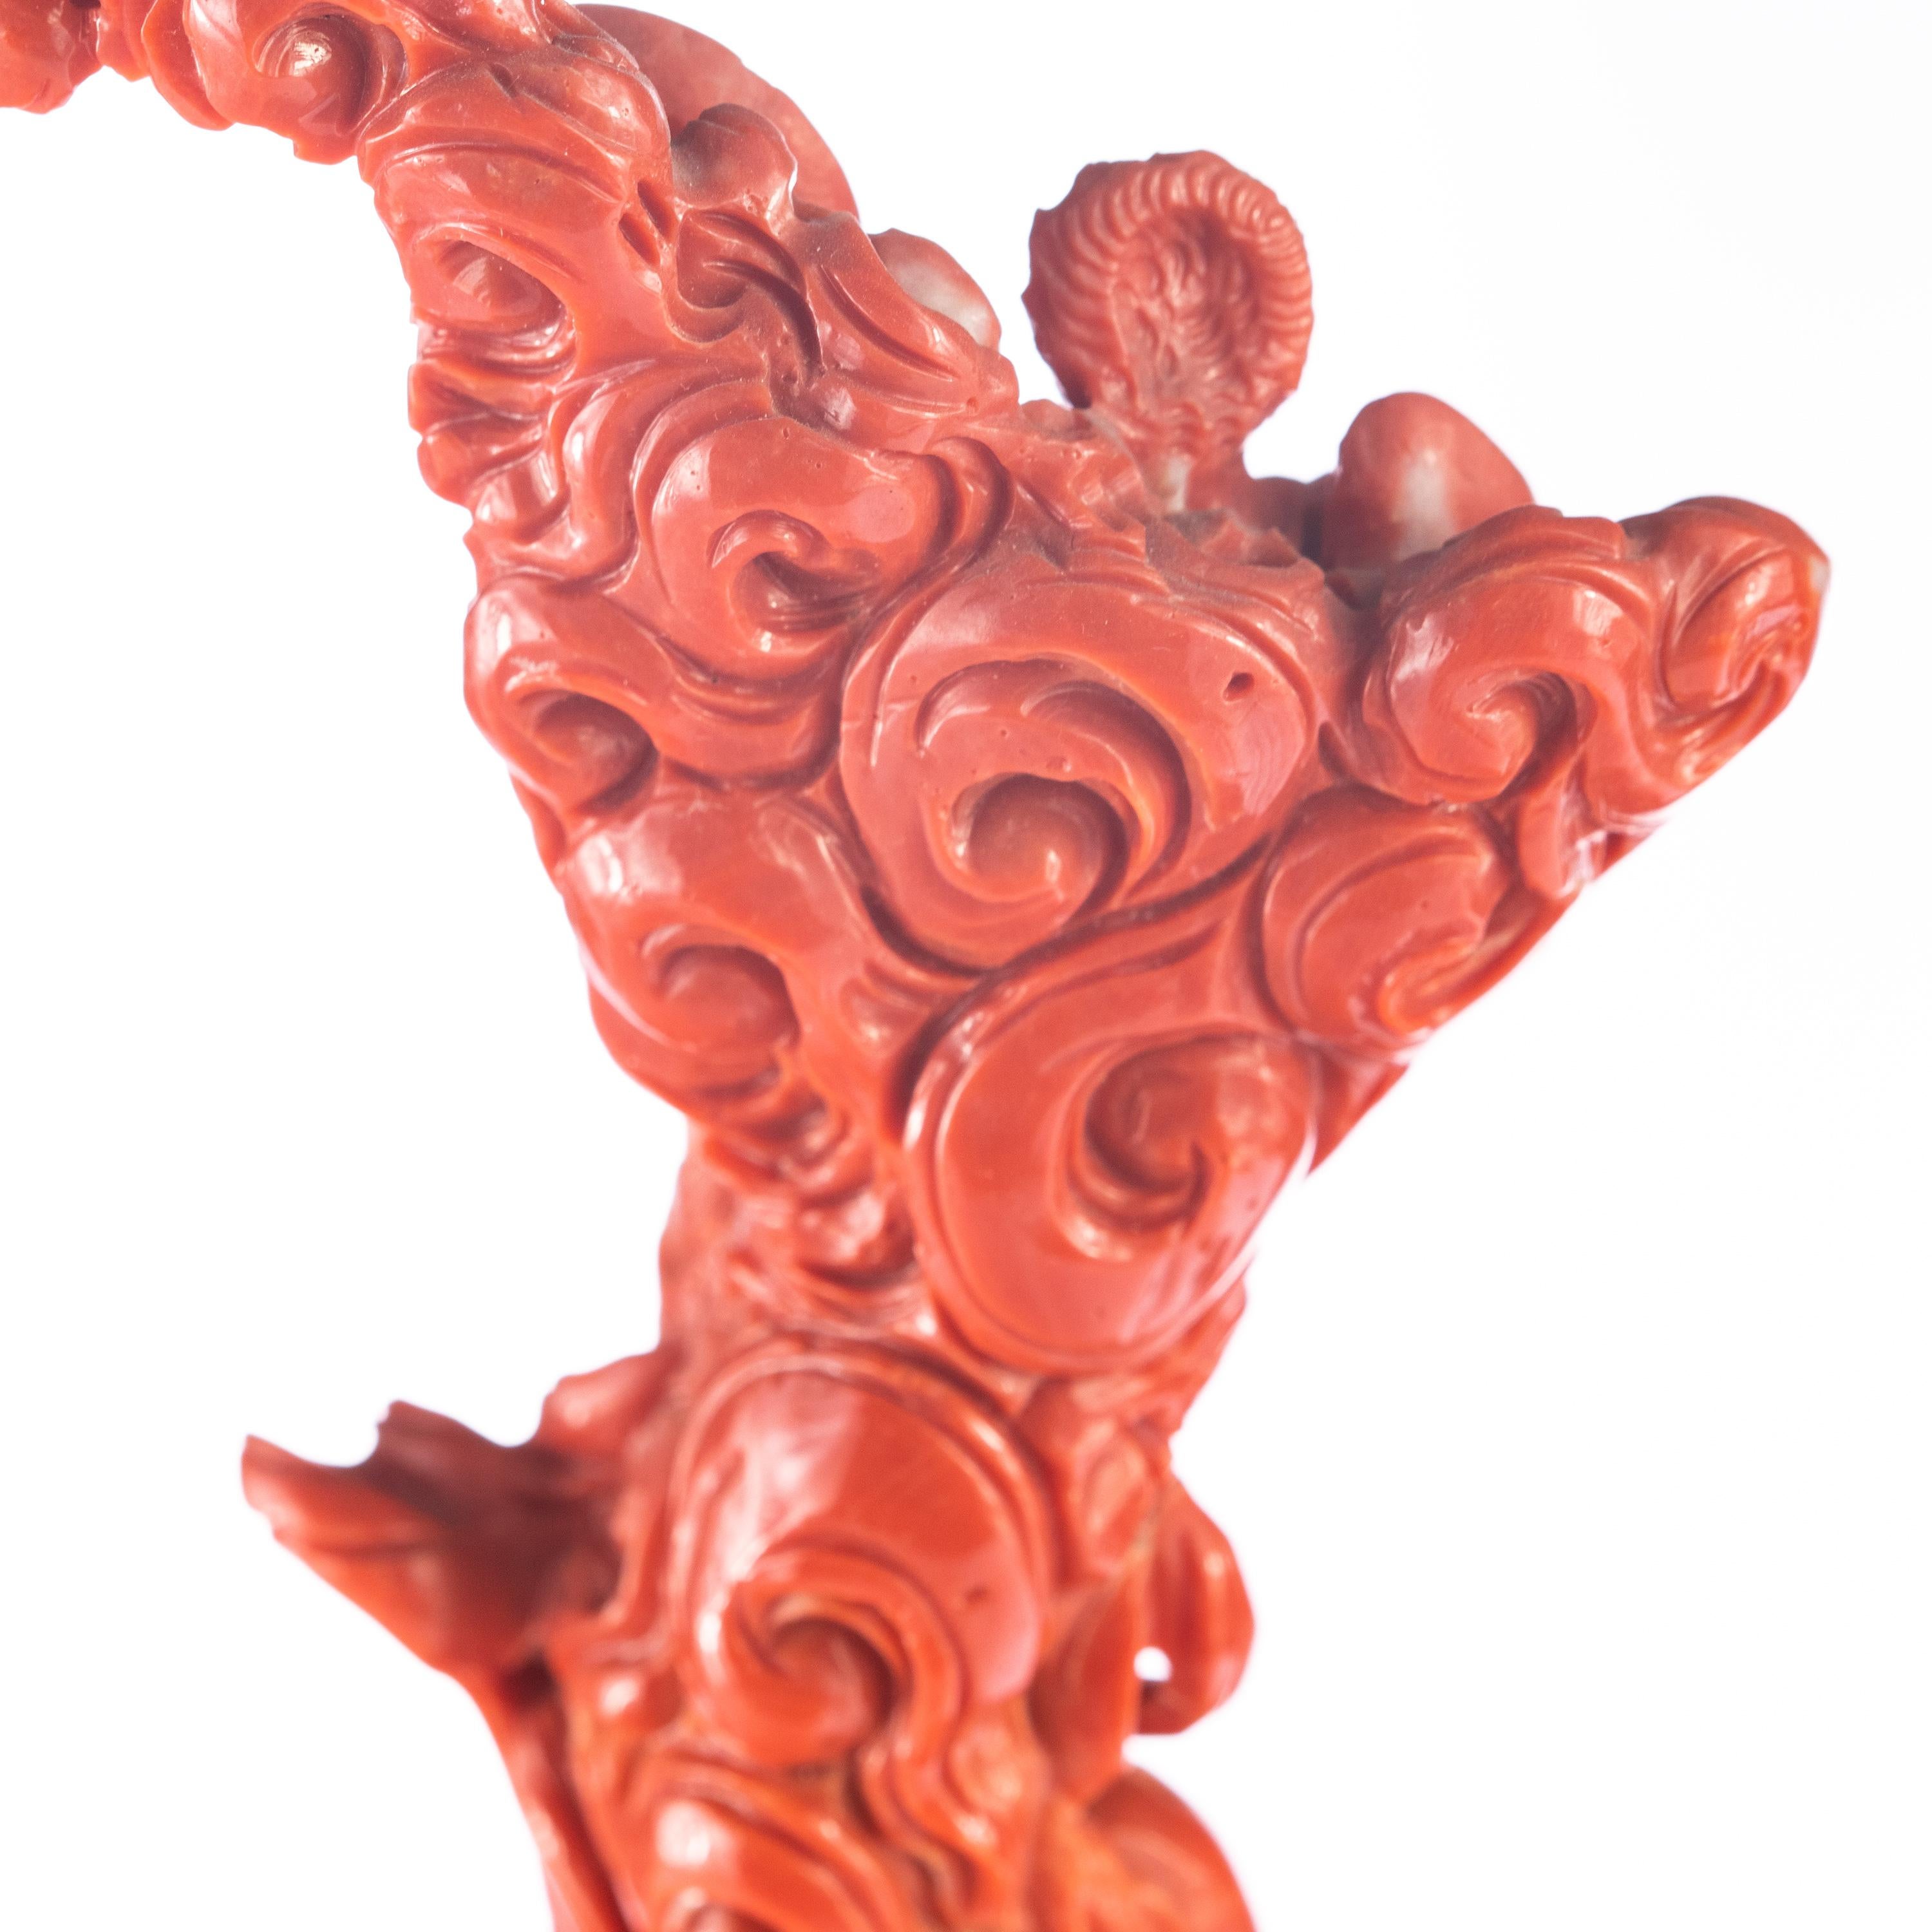 Natural Red Coral Chinese Family Carved Asian Decorative Love Statue Sculpture For Sale 1